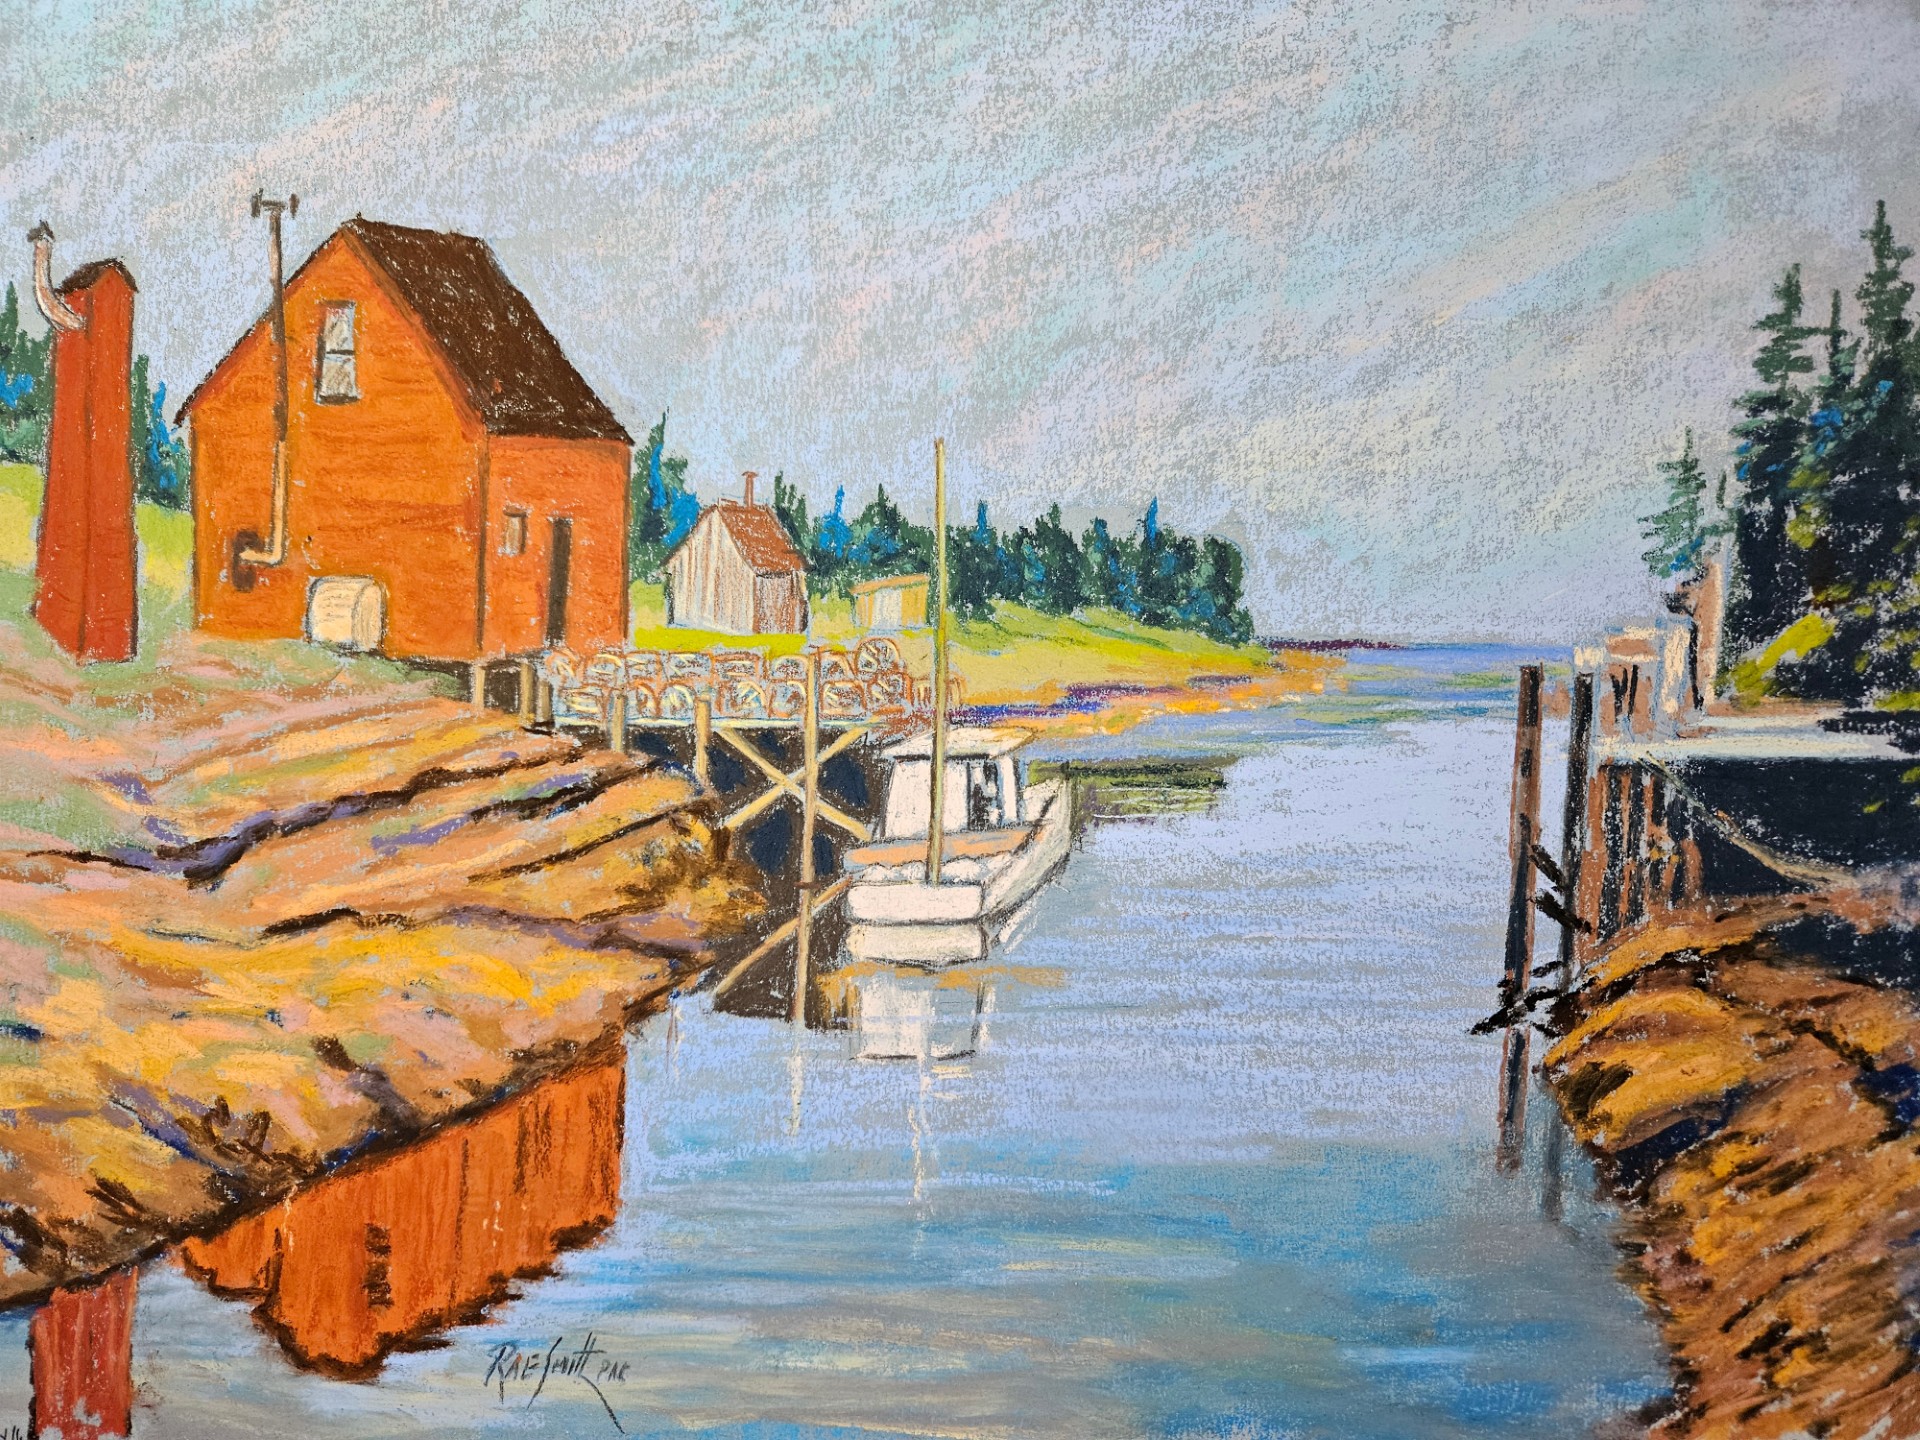 A pastel illustration of a fishing a small fishing boat and house, along a calm waterscape.